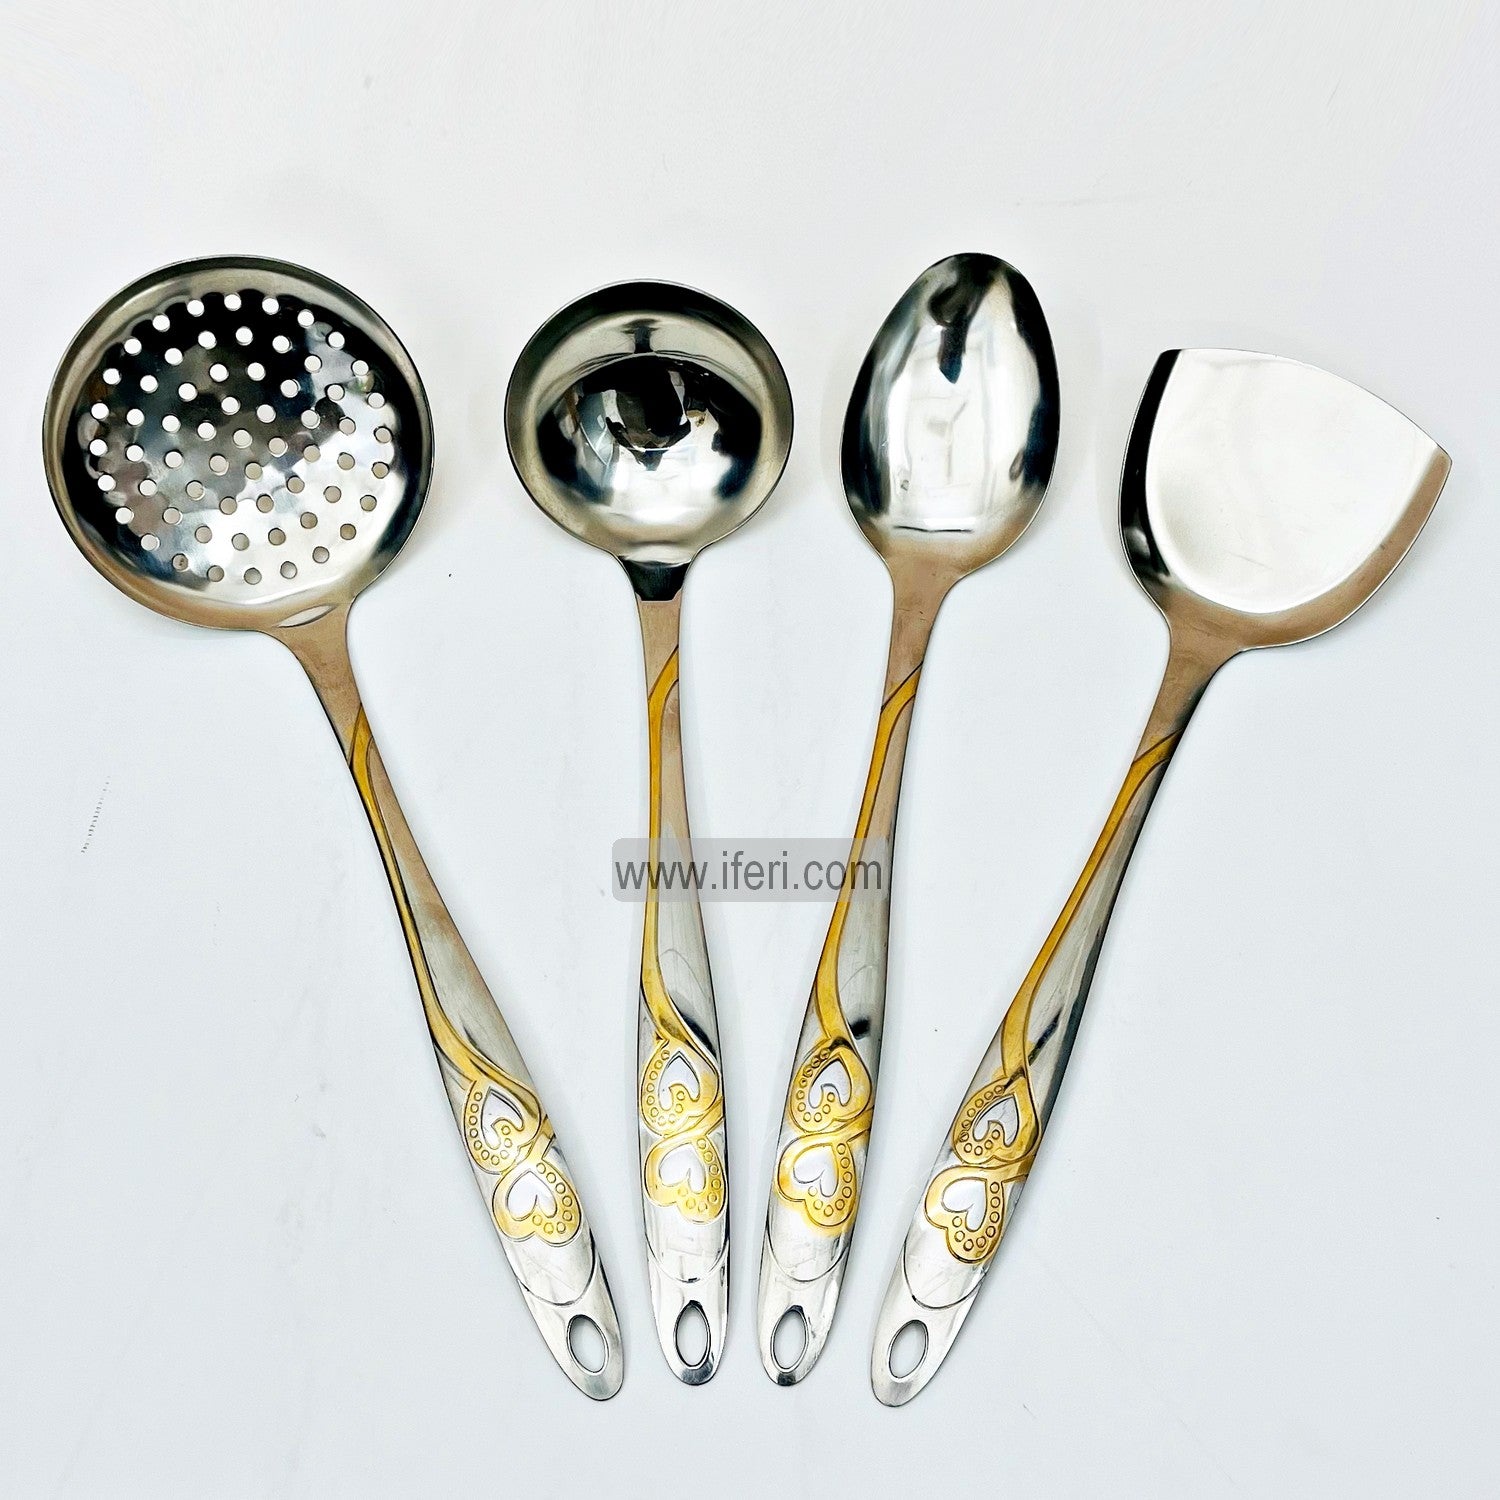 4 pcs Stainless Steel Cooking Spoon Set TB96865